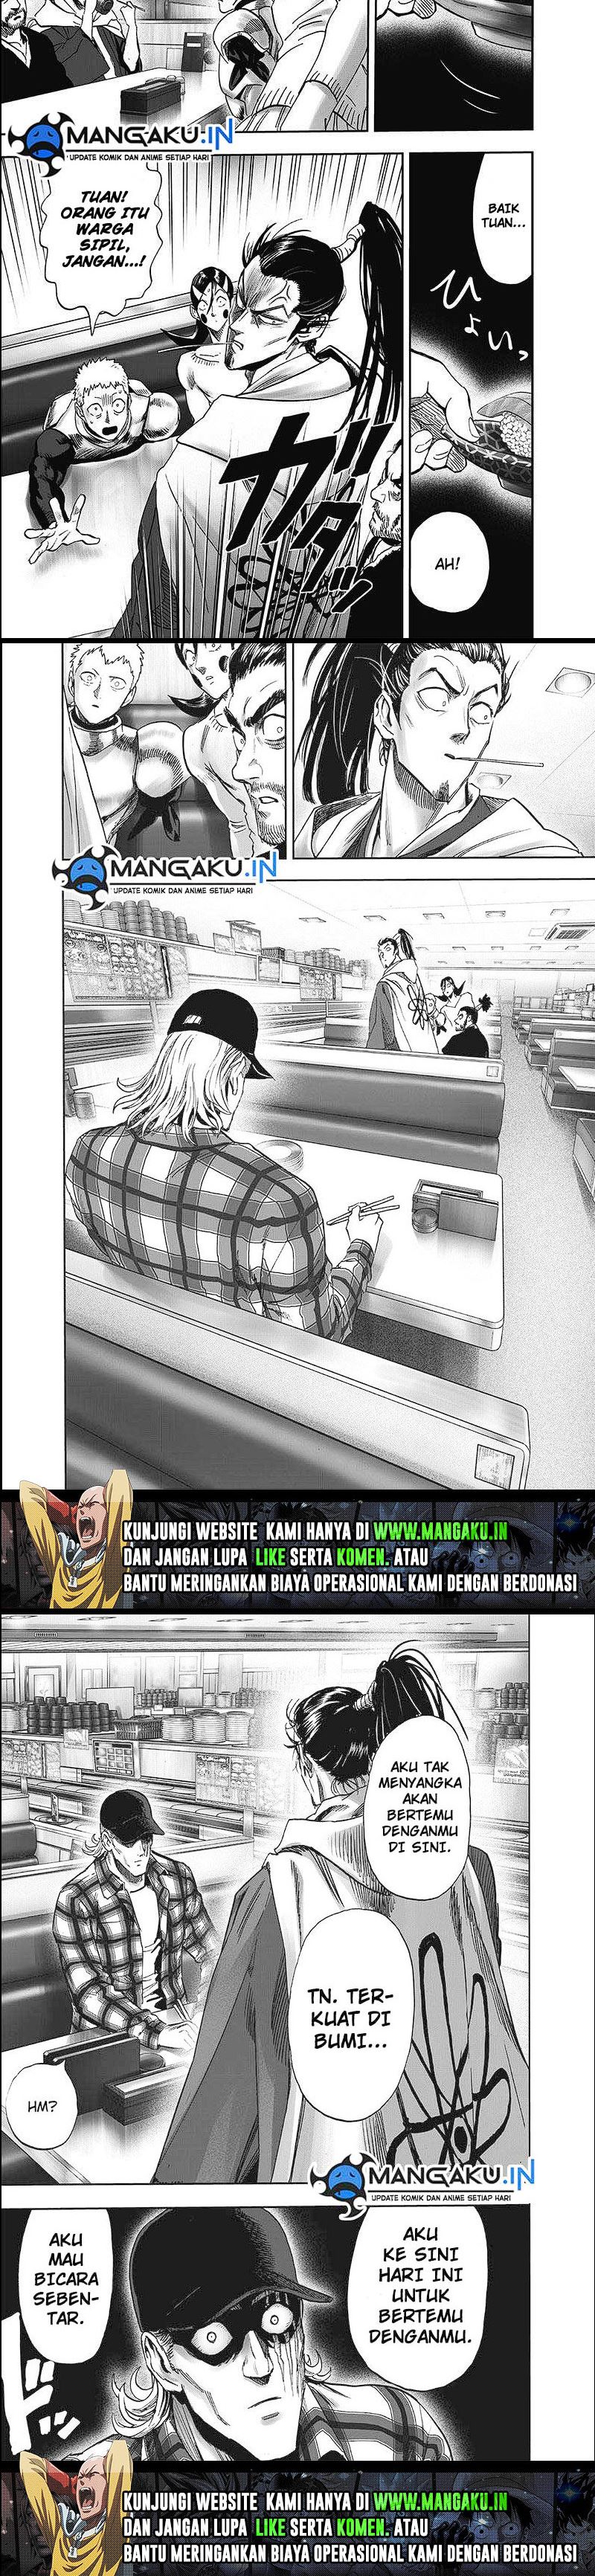 One Punch Man Chapter 238